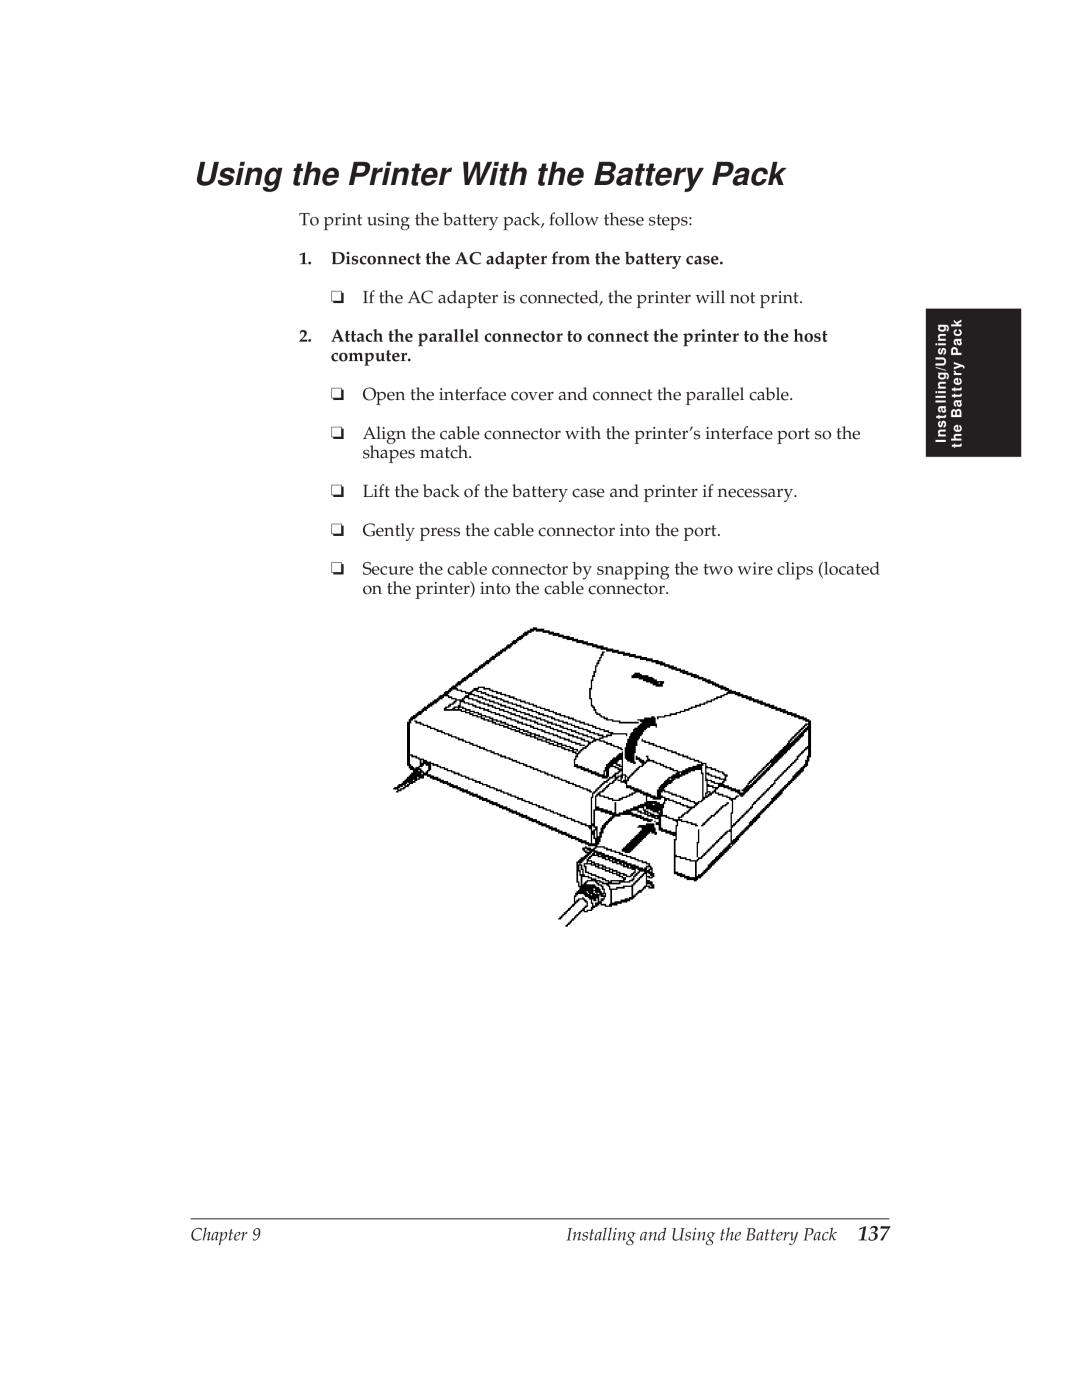 Canon BJ-30 manual Using the Printer With the Battery Pack, Disconnect the AC adapter from the battery case 